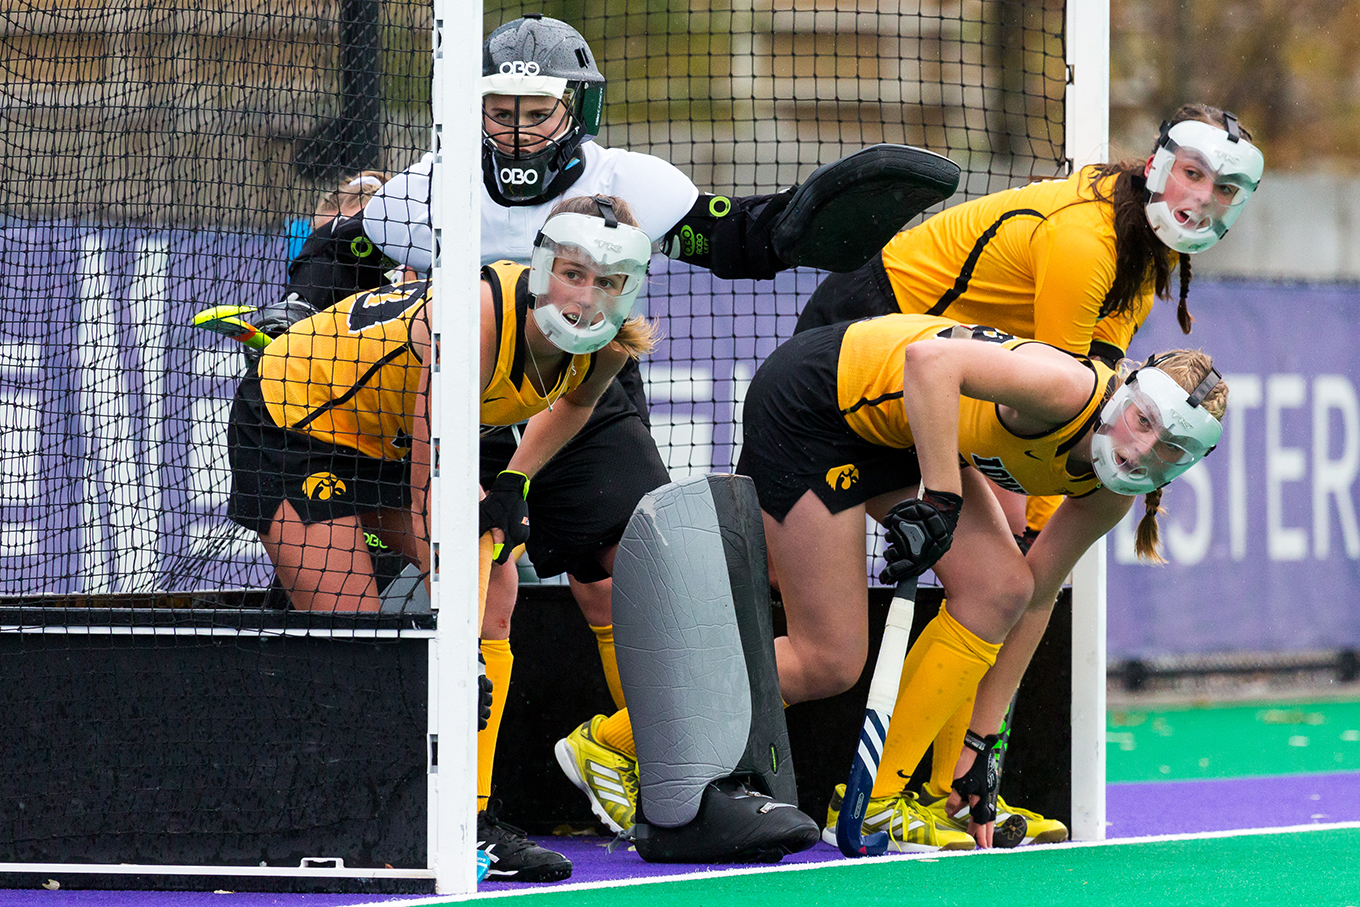  Iowa players stand in the goal to defend a penalty corner during the Championship Game in the Big Ten Field Hockey Tournament at Lakeside Field in Evanston, IL on Sunday, Nov. 3, 2018. The no. 2 ranked Terrapins defeated the no. 8 ranked Hawkeyes 2-